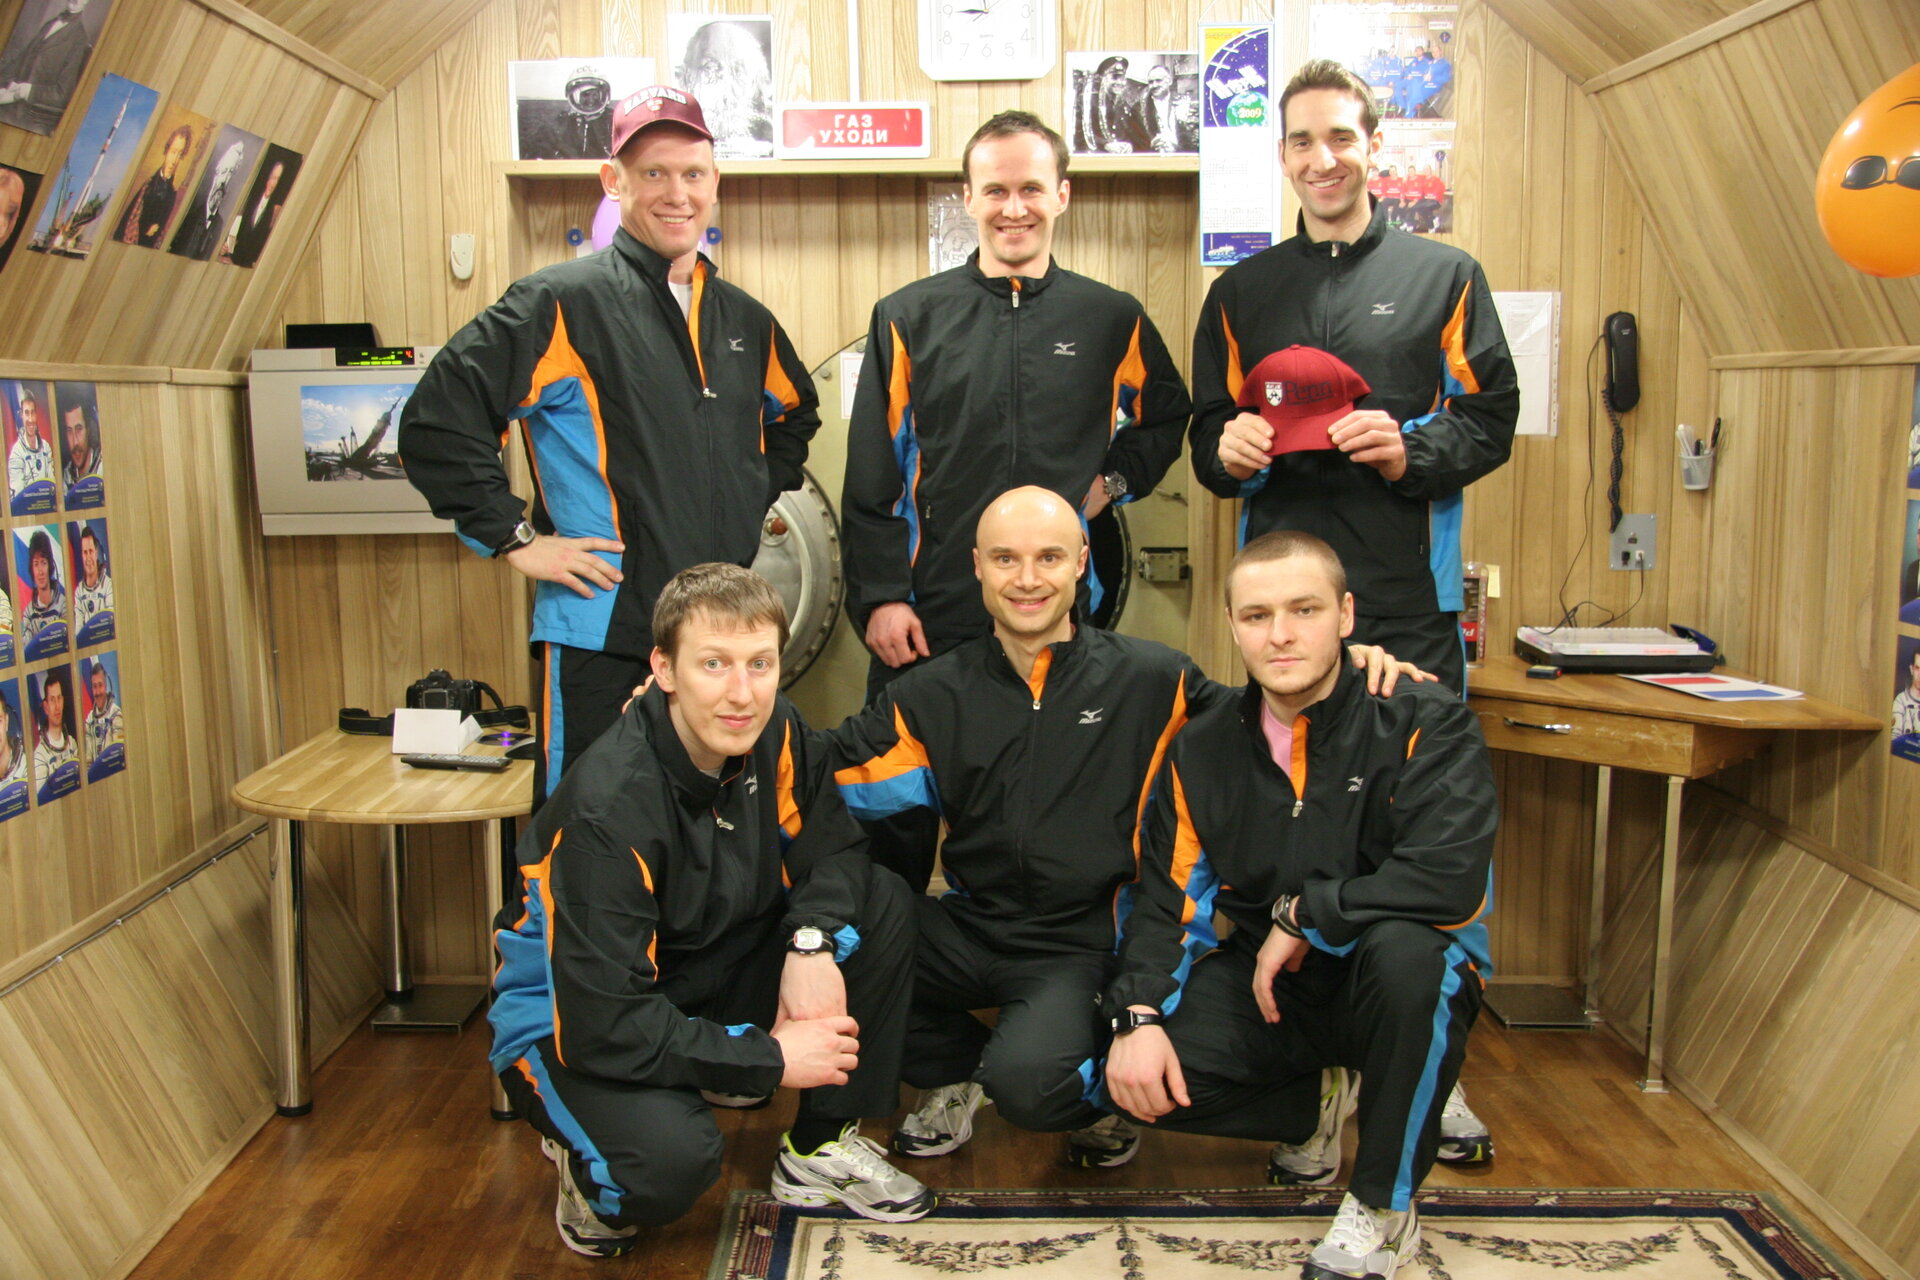 The crew of six has completed their 105-day Mars mission simulation inside the isolation facility in Moscow